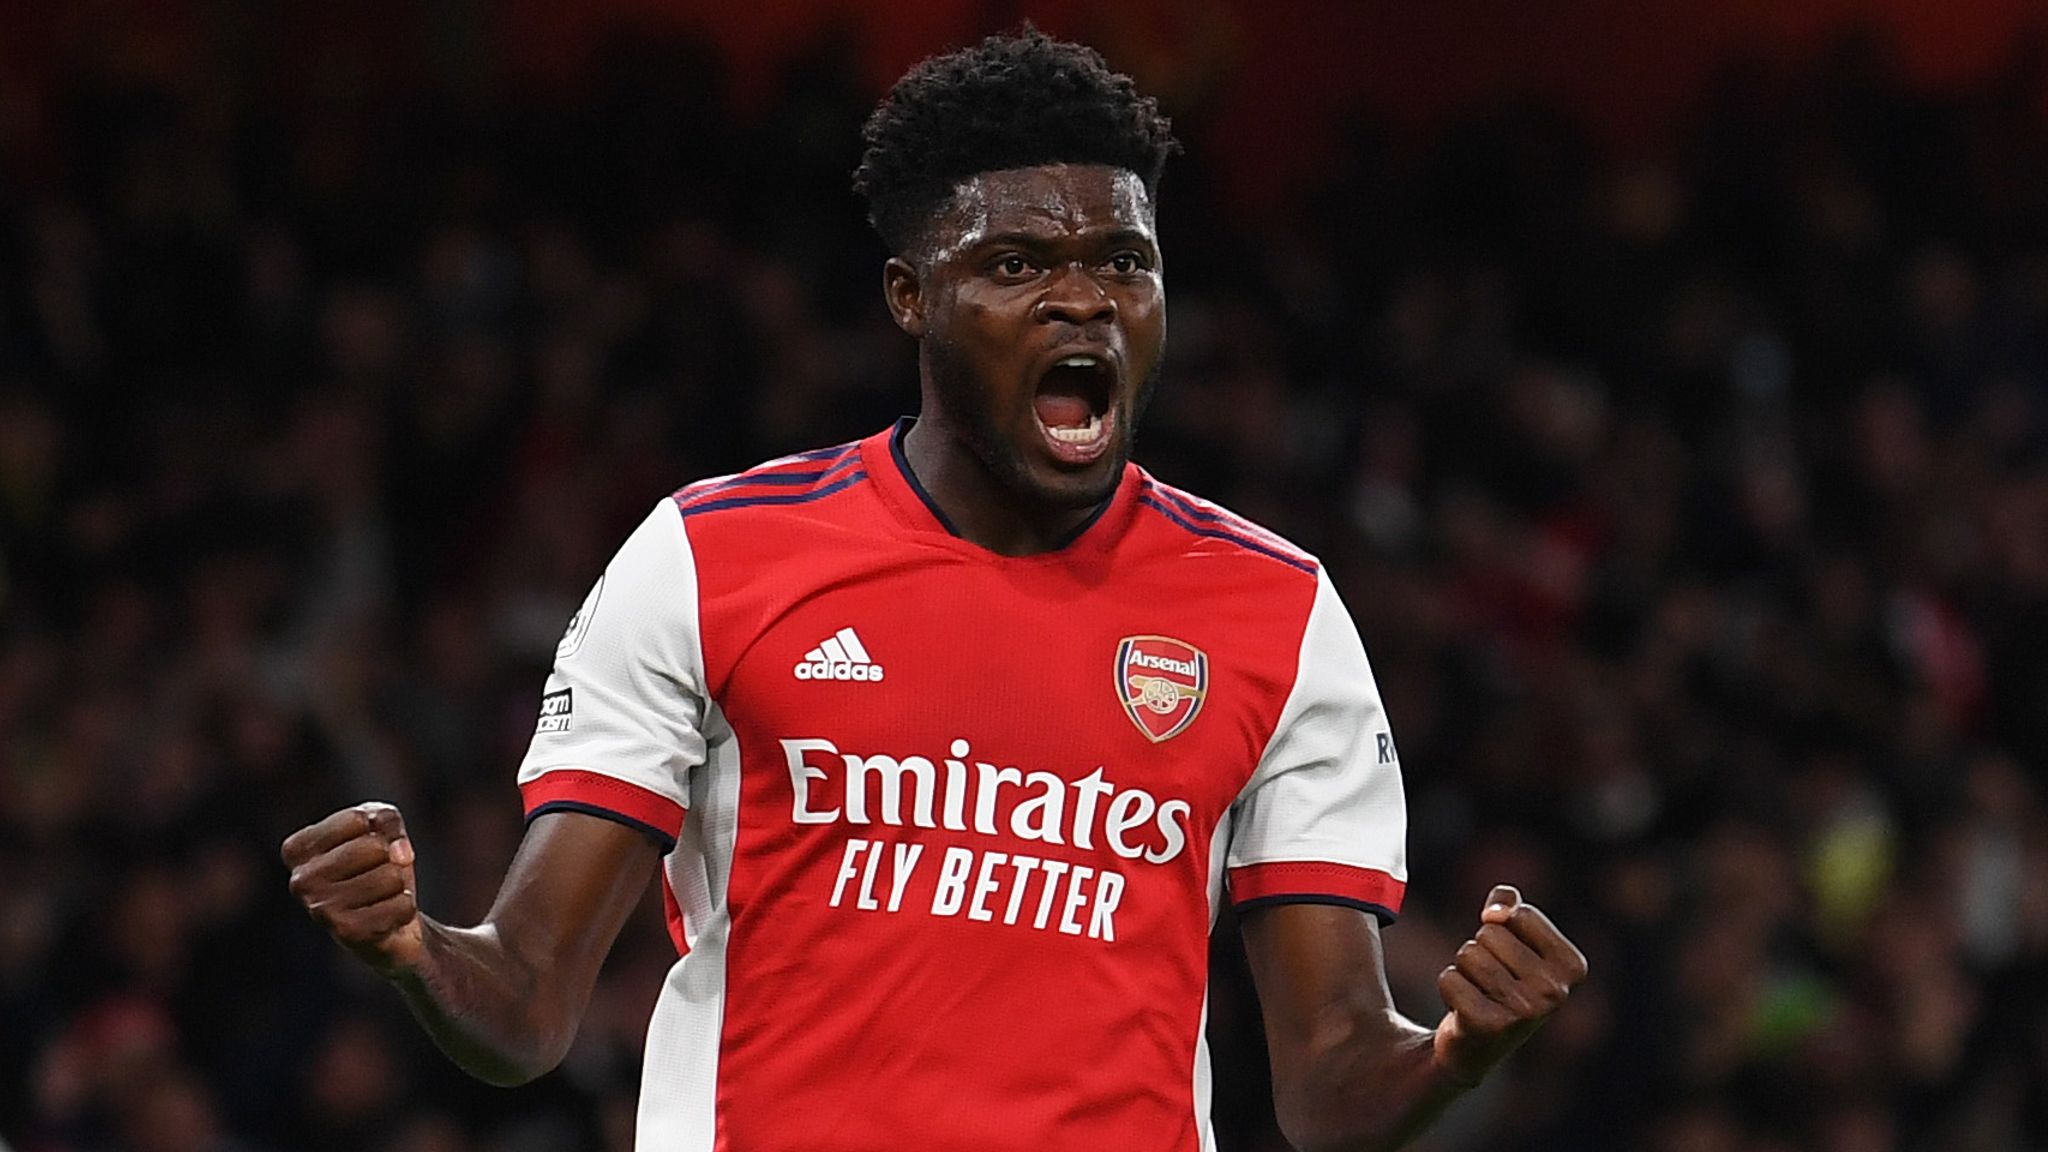 Barcelona reportedly shows interest in Arsenal’s defensive midfielder, Thomas Partey